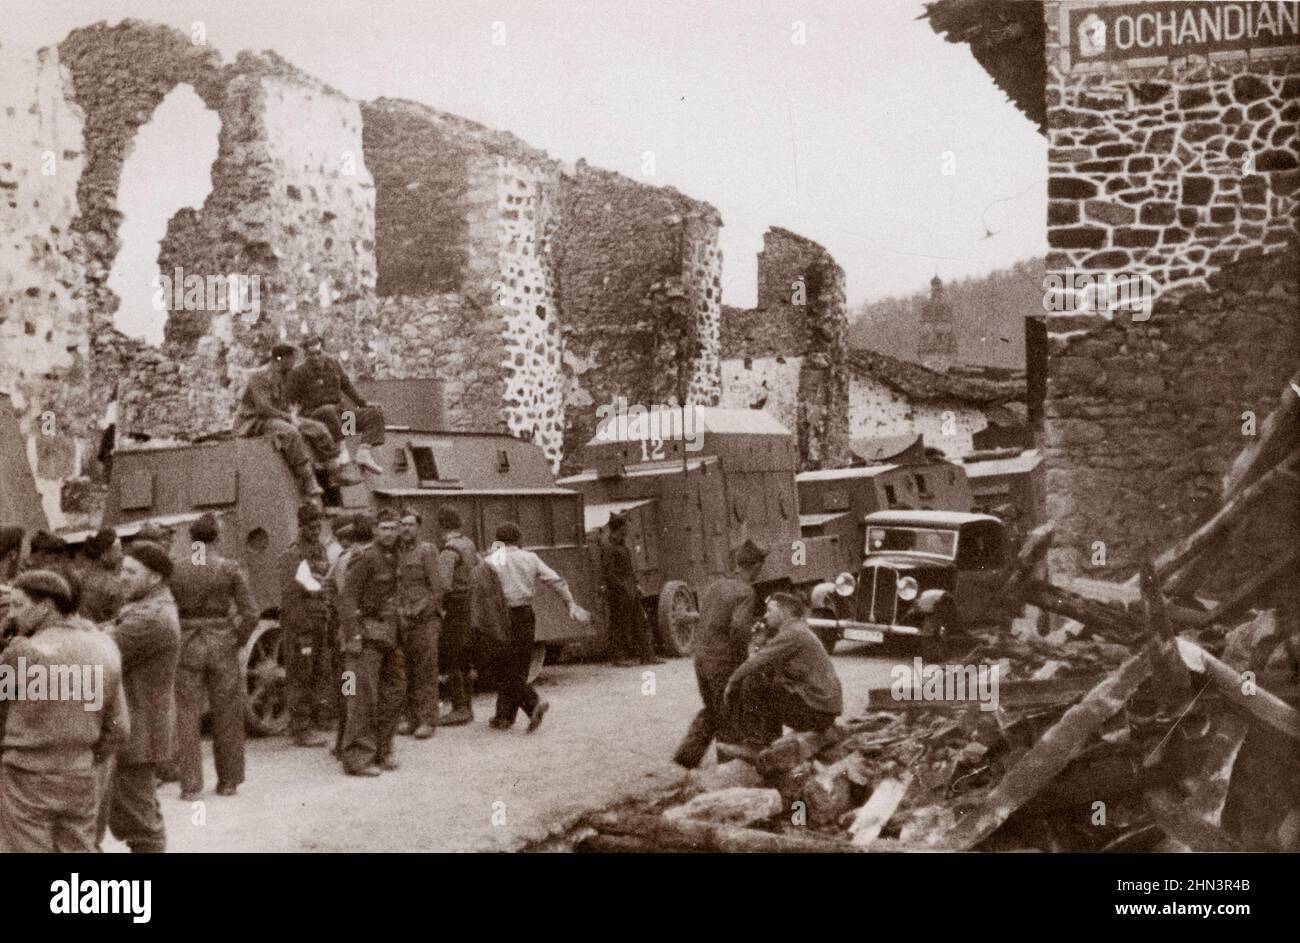 Archival photo of the Spanish Civil War. Troops and armored cars on the Basque (Ochandian) front. Spain. April 1937 Stock Photo